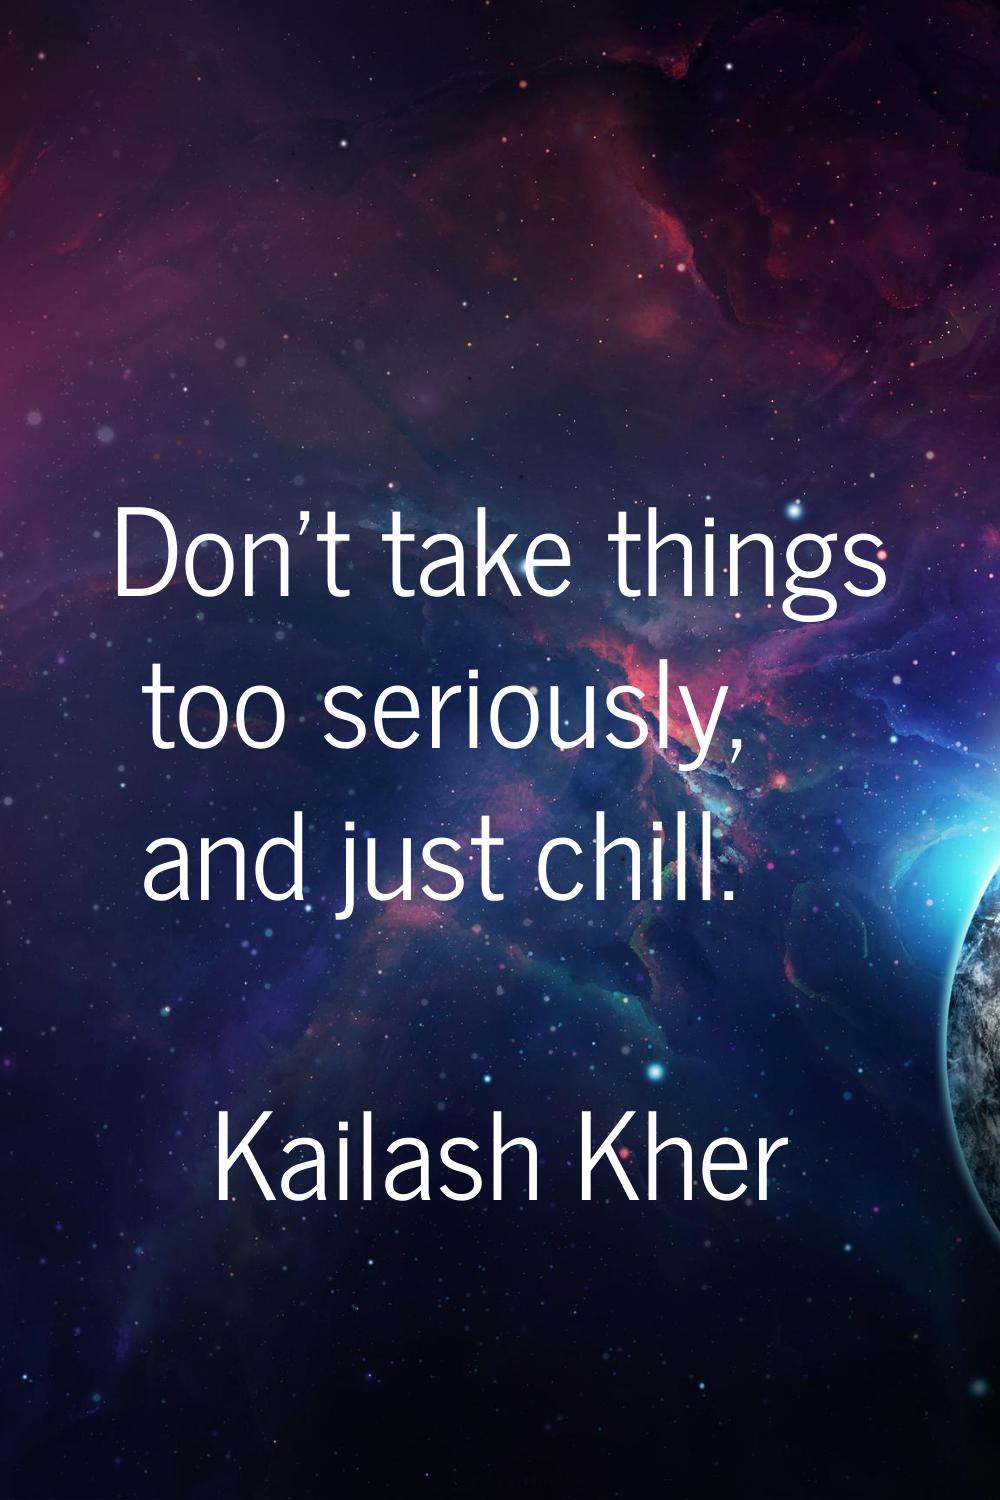 Don't take things too seriously, and just chill.